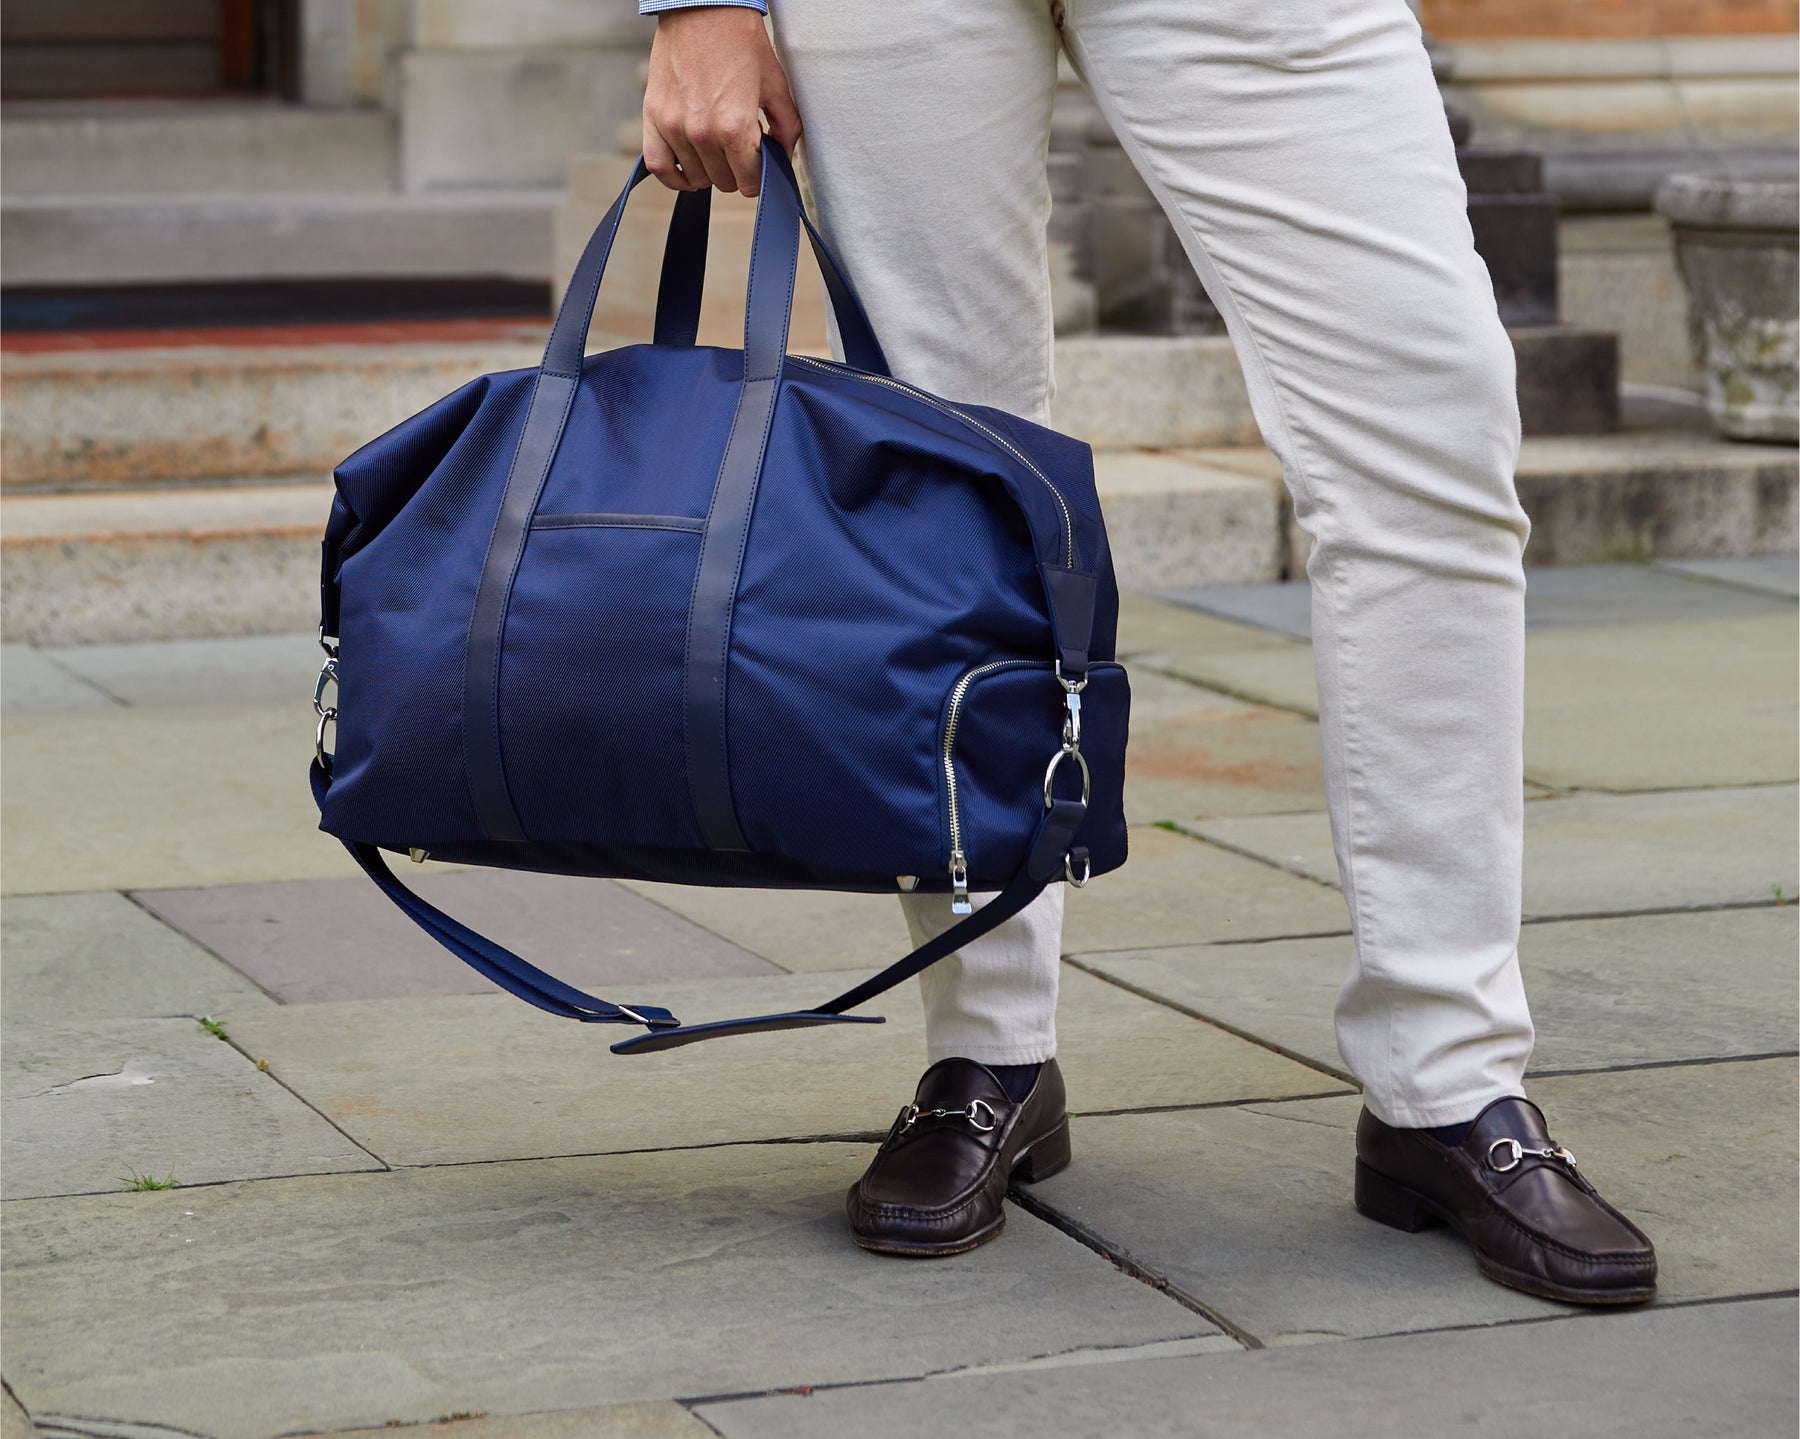 Duffel Leather Blue Duffle Bag, For Travel